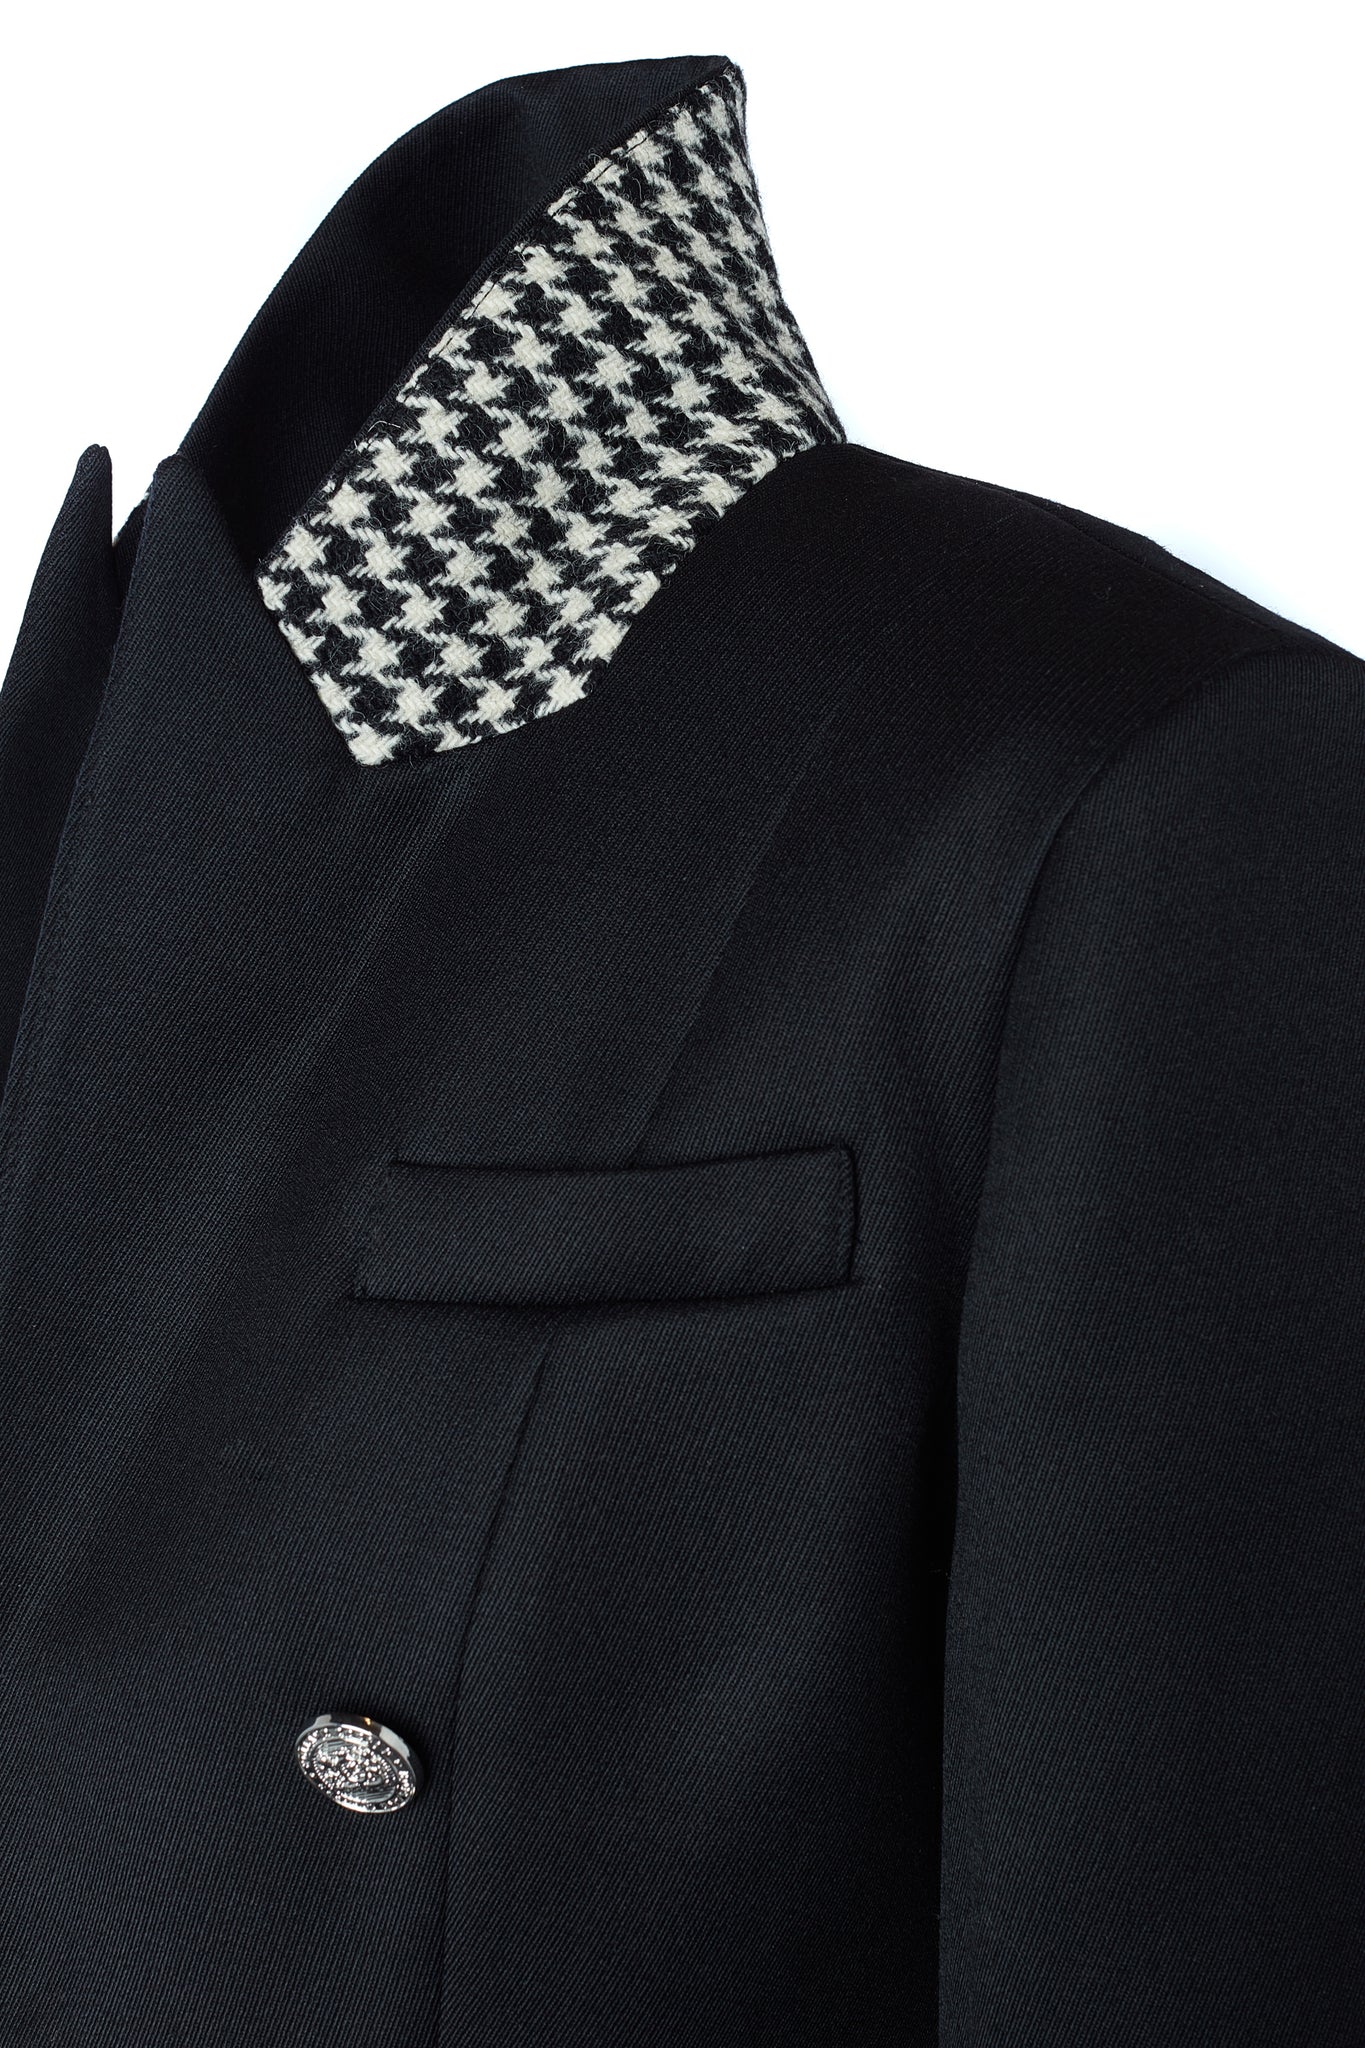 detail of houndstooth under collar on British made tailored cropped jacket in black with welt pockets and gold button detail down the front and on sleeves